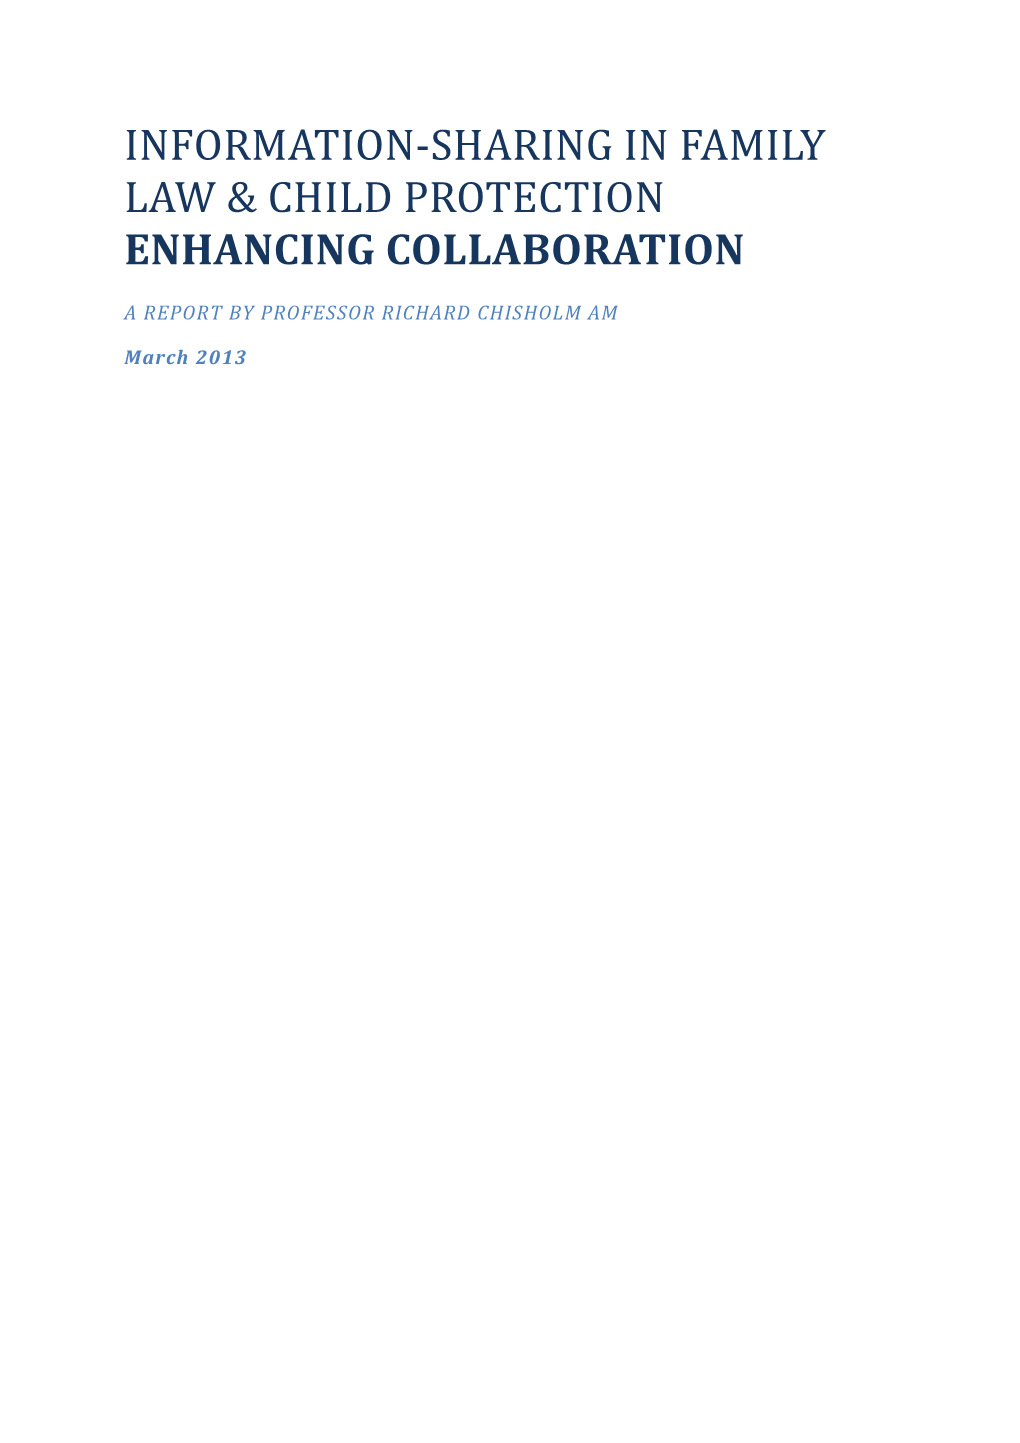 Information Sharing in Family Law and Child Protection - Enhancing Collaboration - April 2012